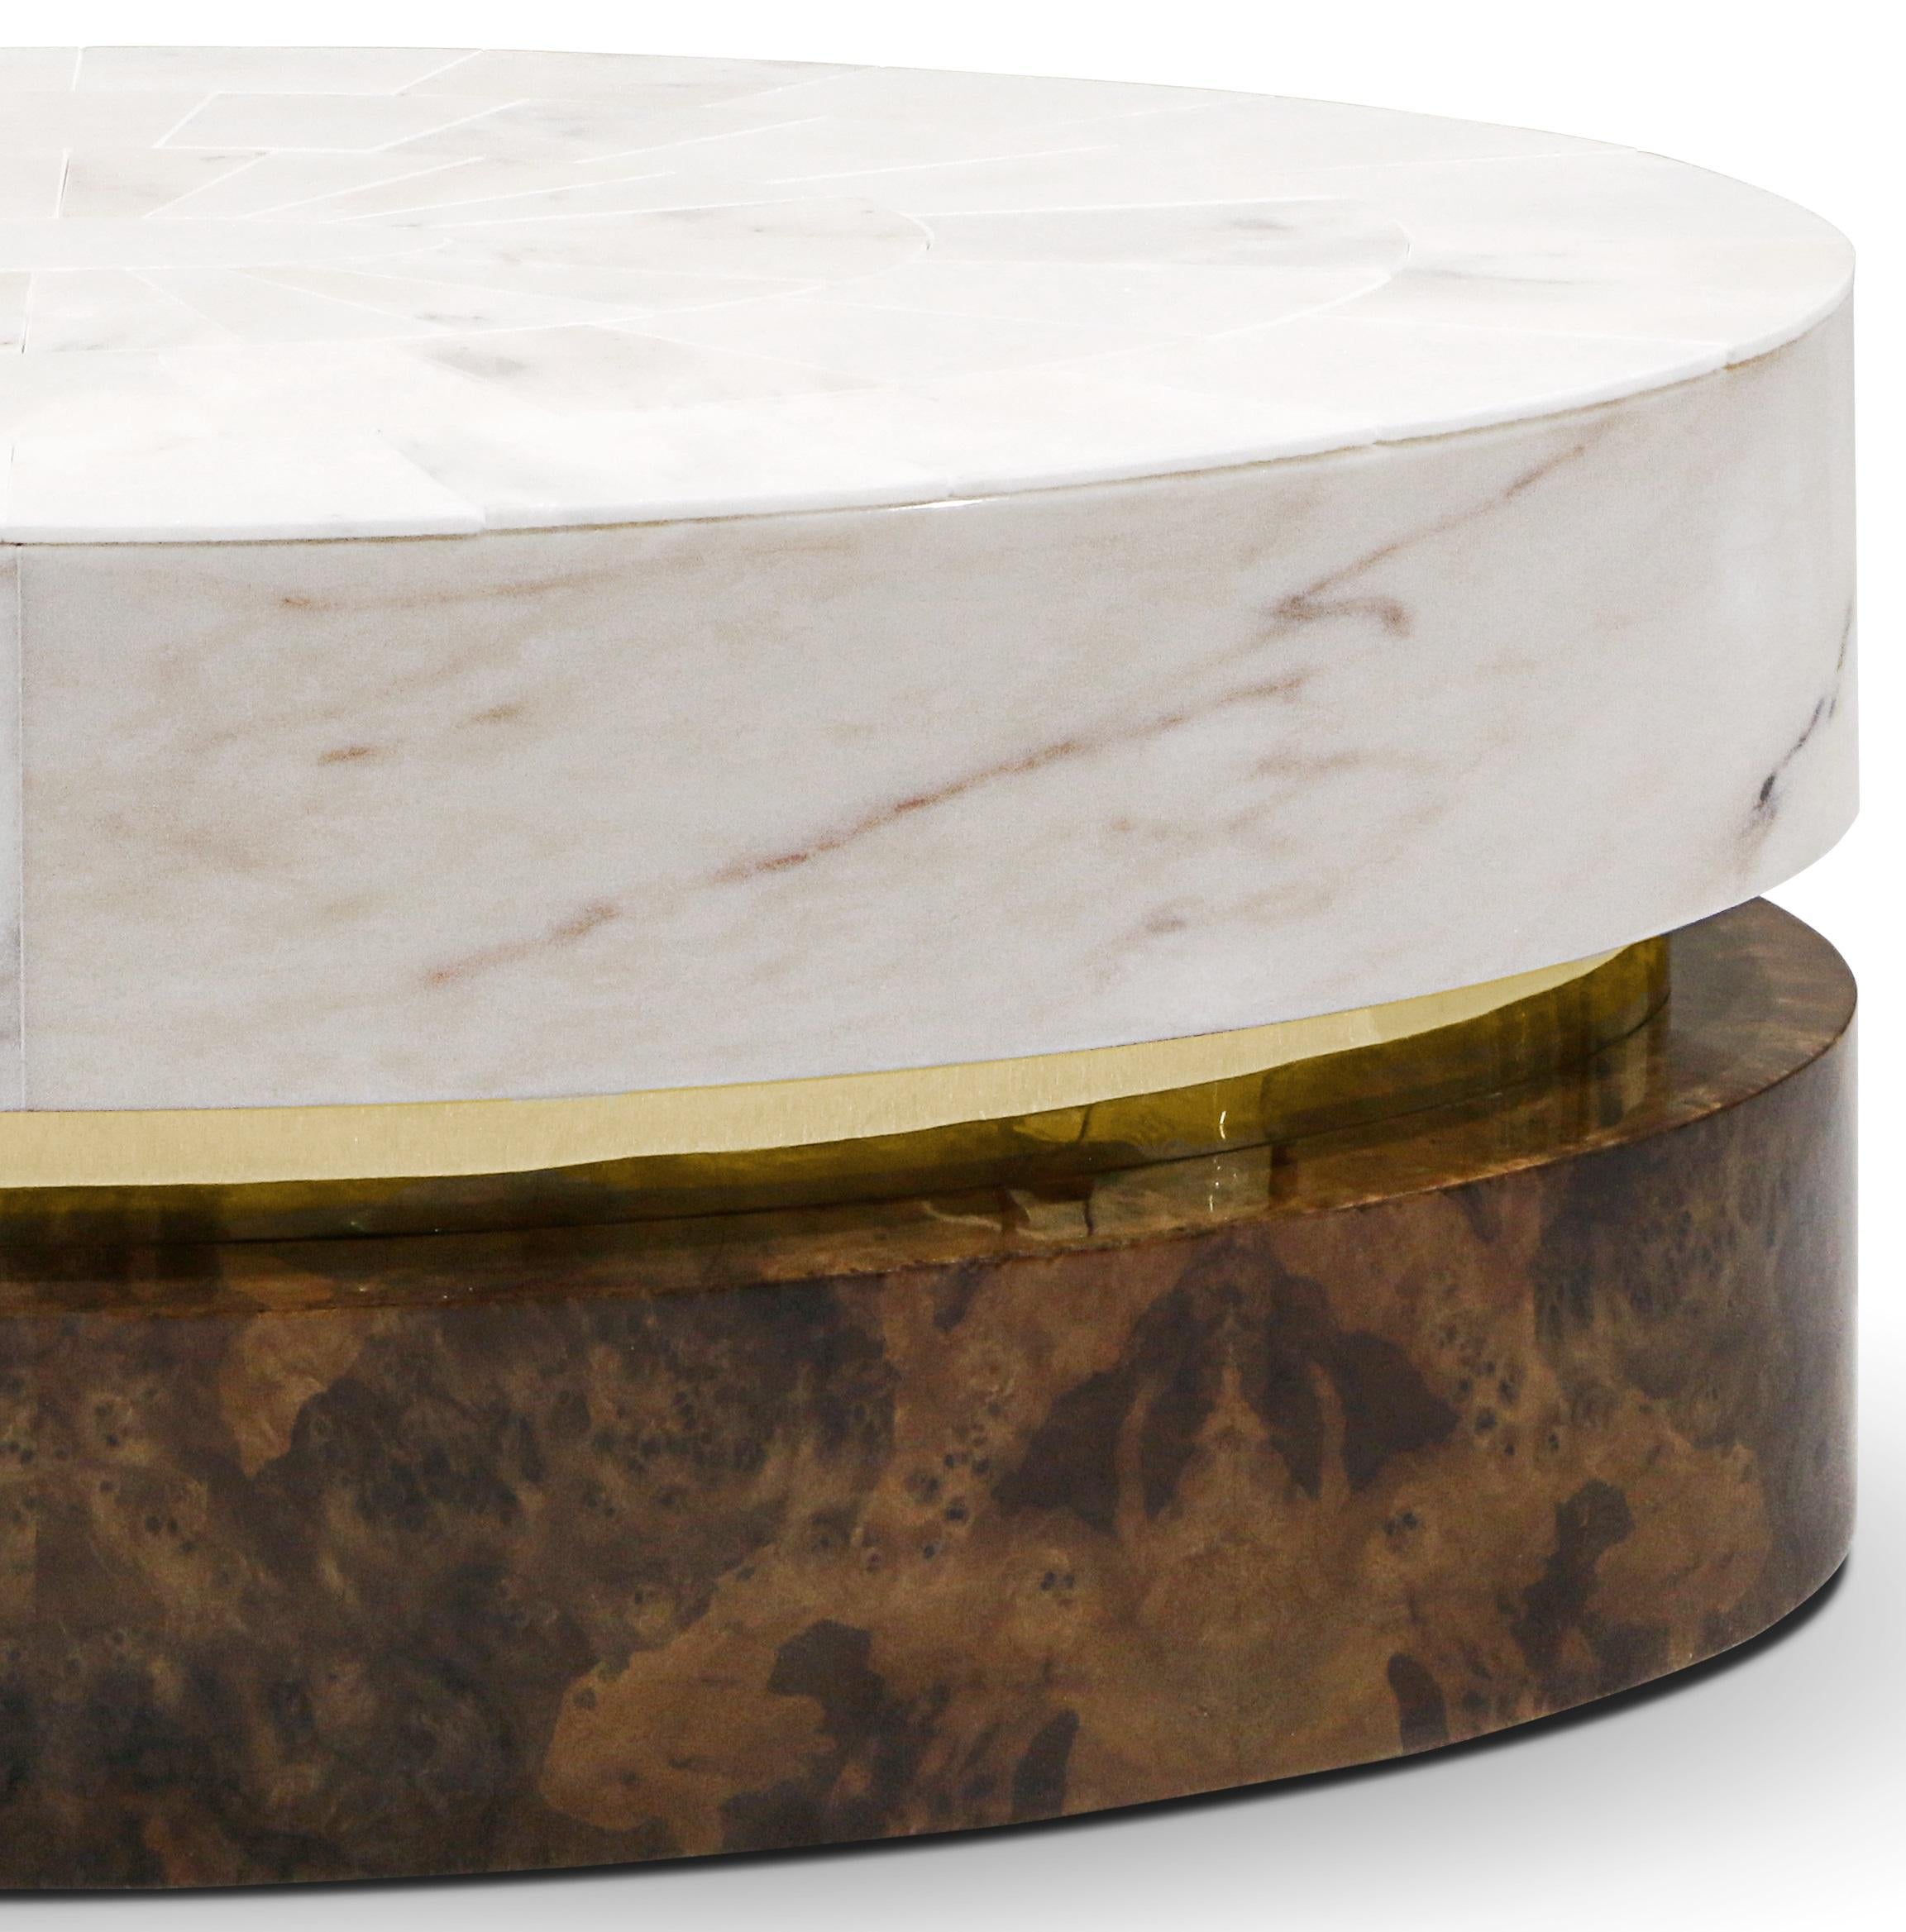 Infinity Center Table by Memoir Essence
Dimensions: D 53 x W 100 x H 35 cm.
Materials: Polished brass, walnut root and white marble.

Also available in brushed brass. Please contact us.

This center table presents an exquisite material selection